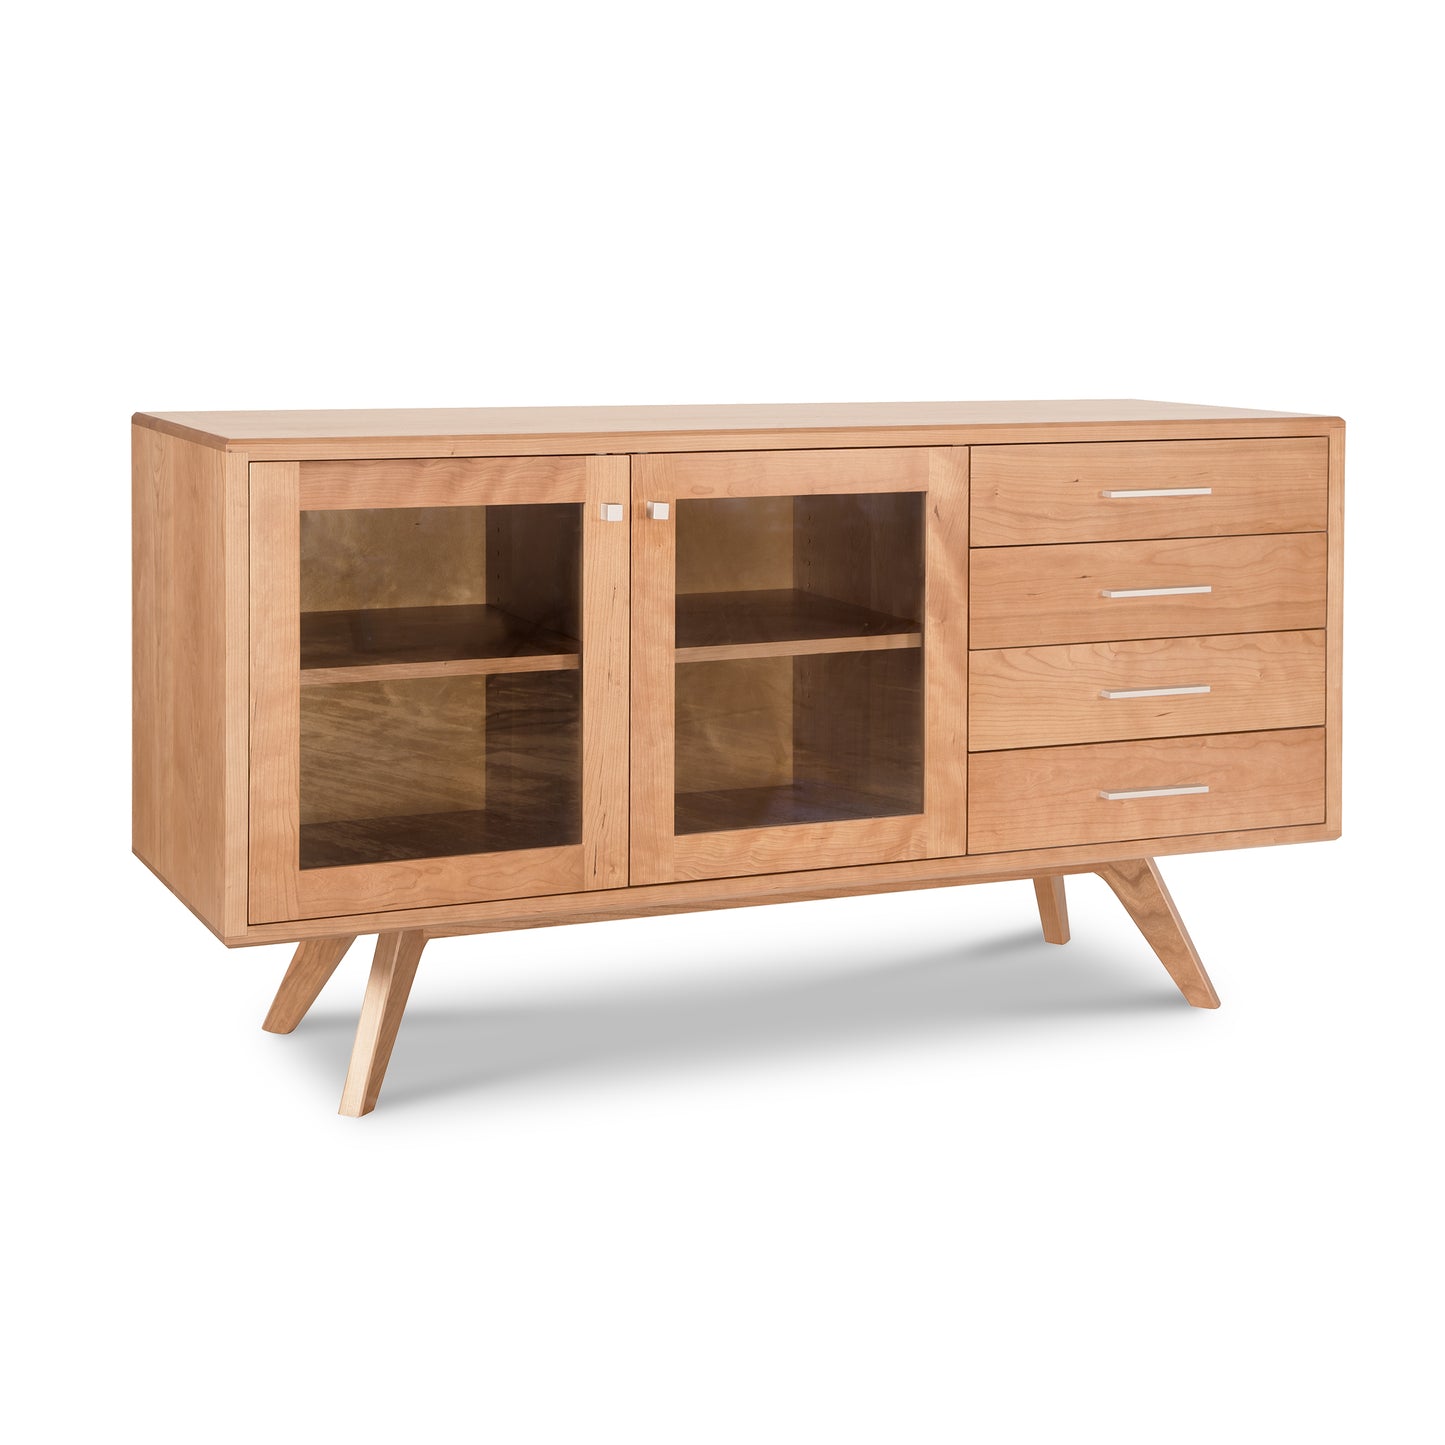 The Lyndon Furniture Brighton Buffet is a sleek and elegant mid-century modern sideboard that features glass doors and drawers, offering ample storage space.